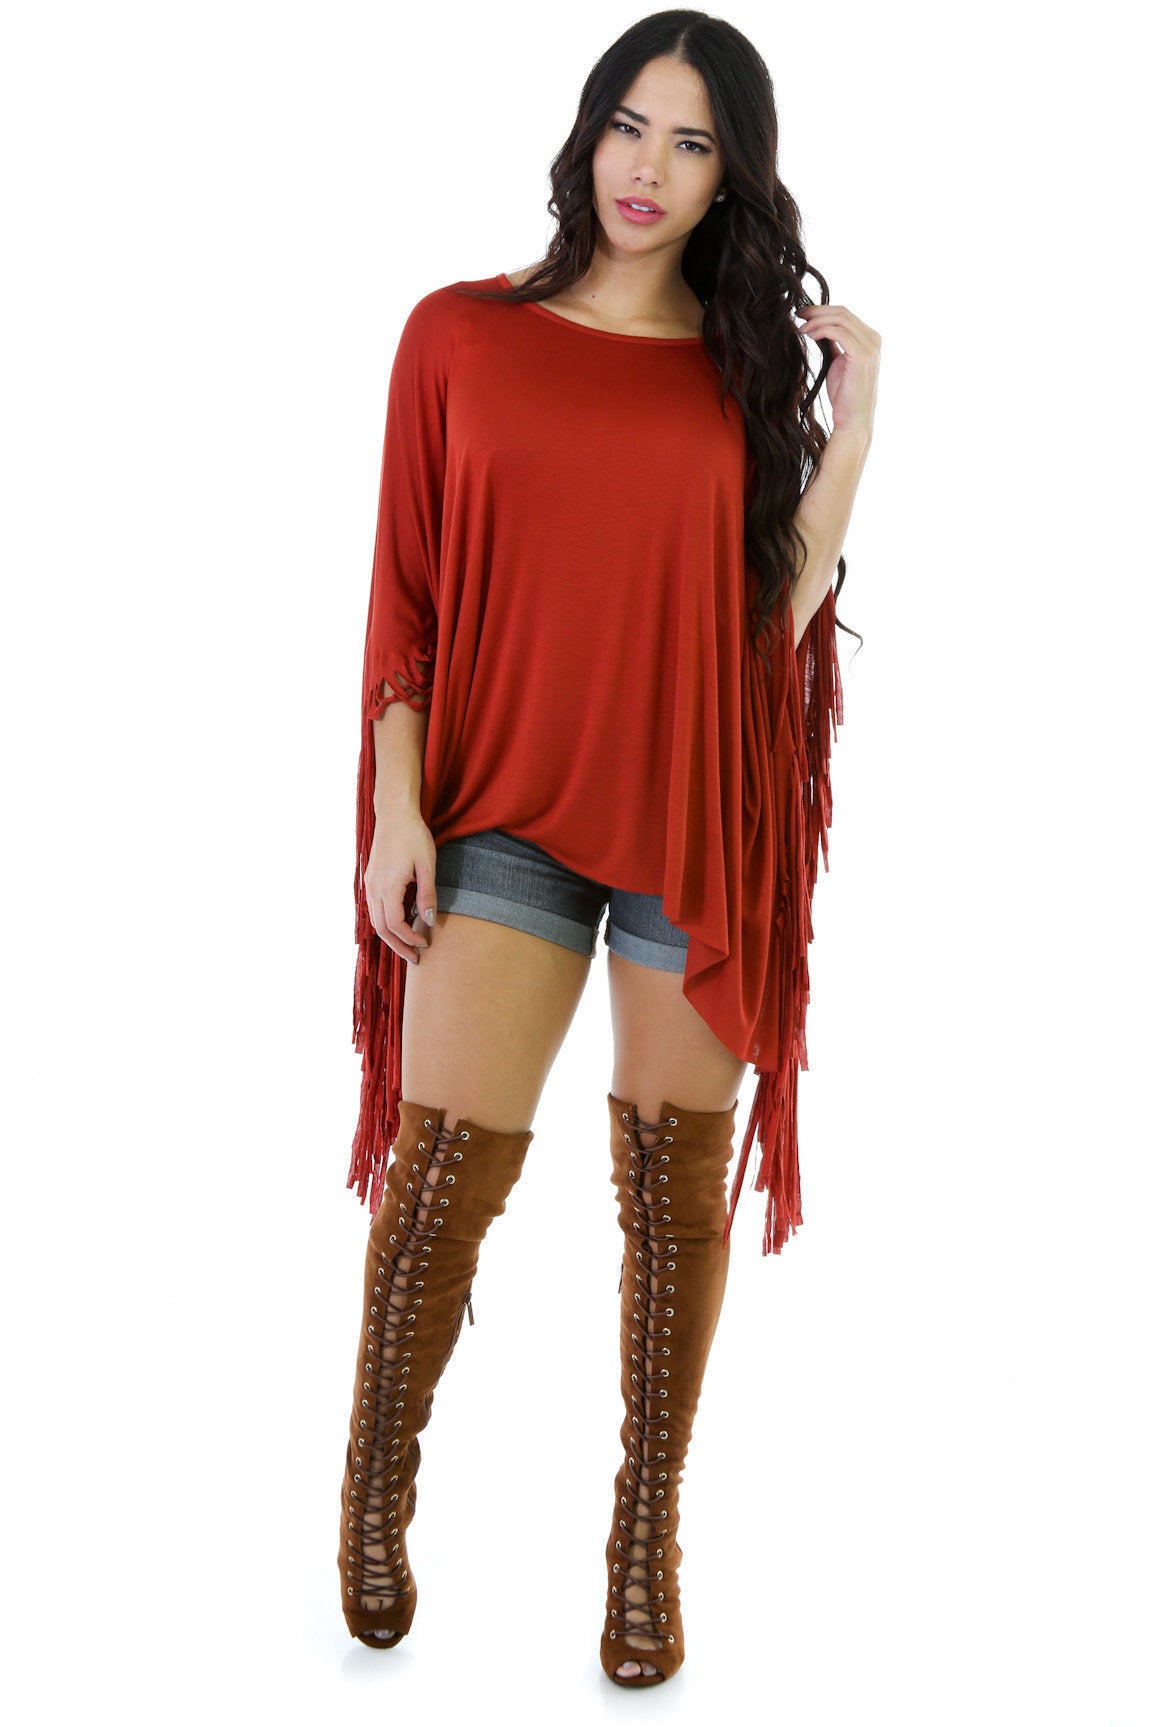 Lace Up Thigh High Boots